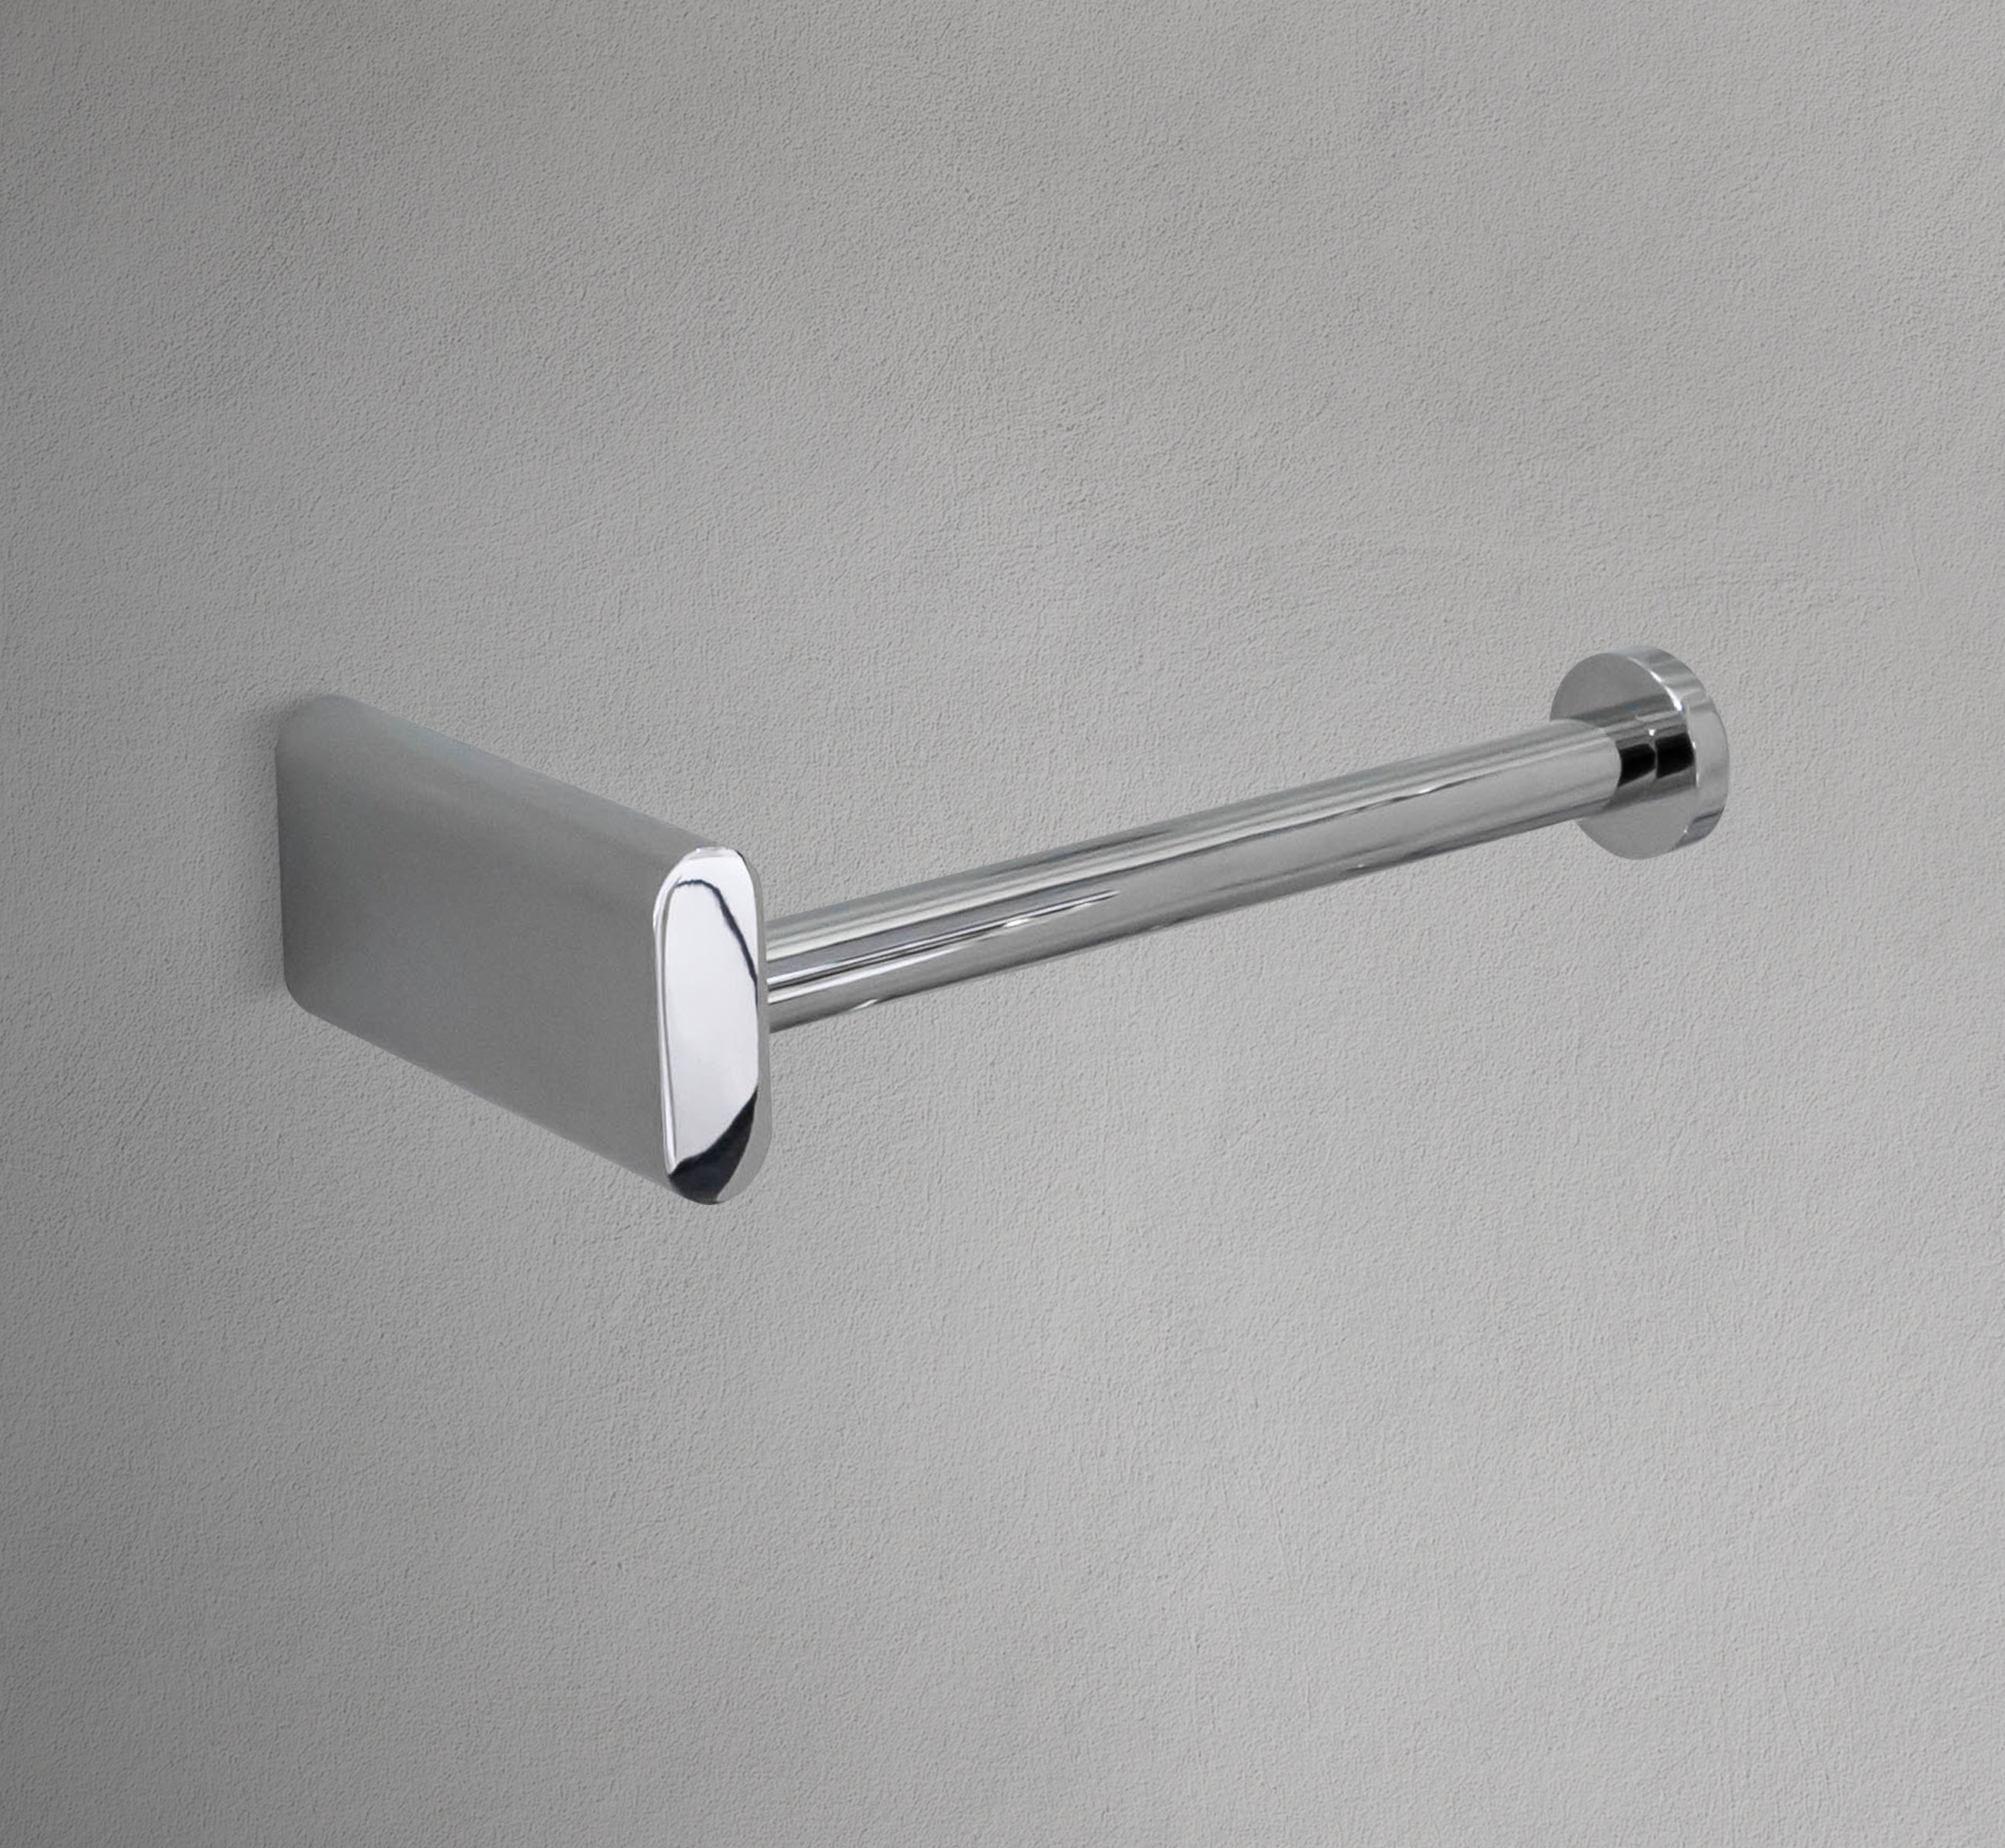 AC 3708 Toilet Paper Holder overview